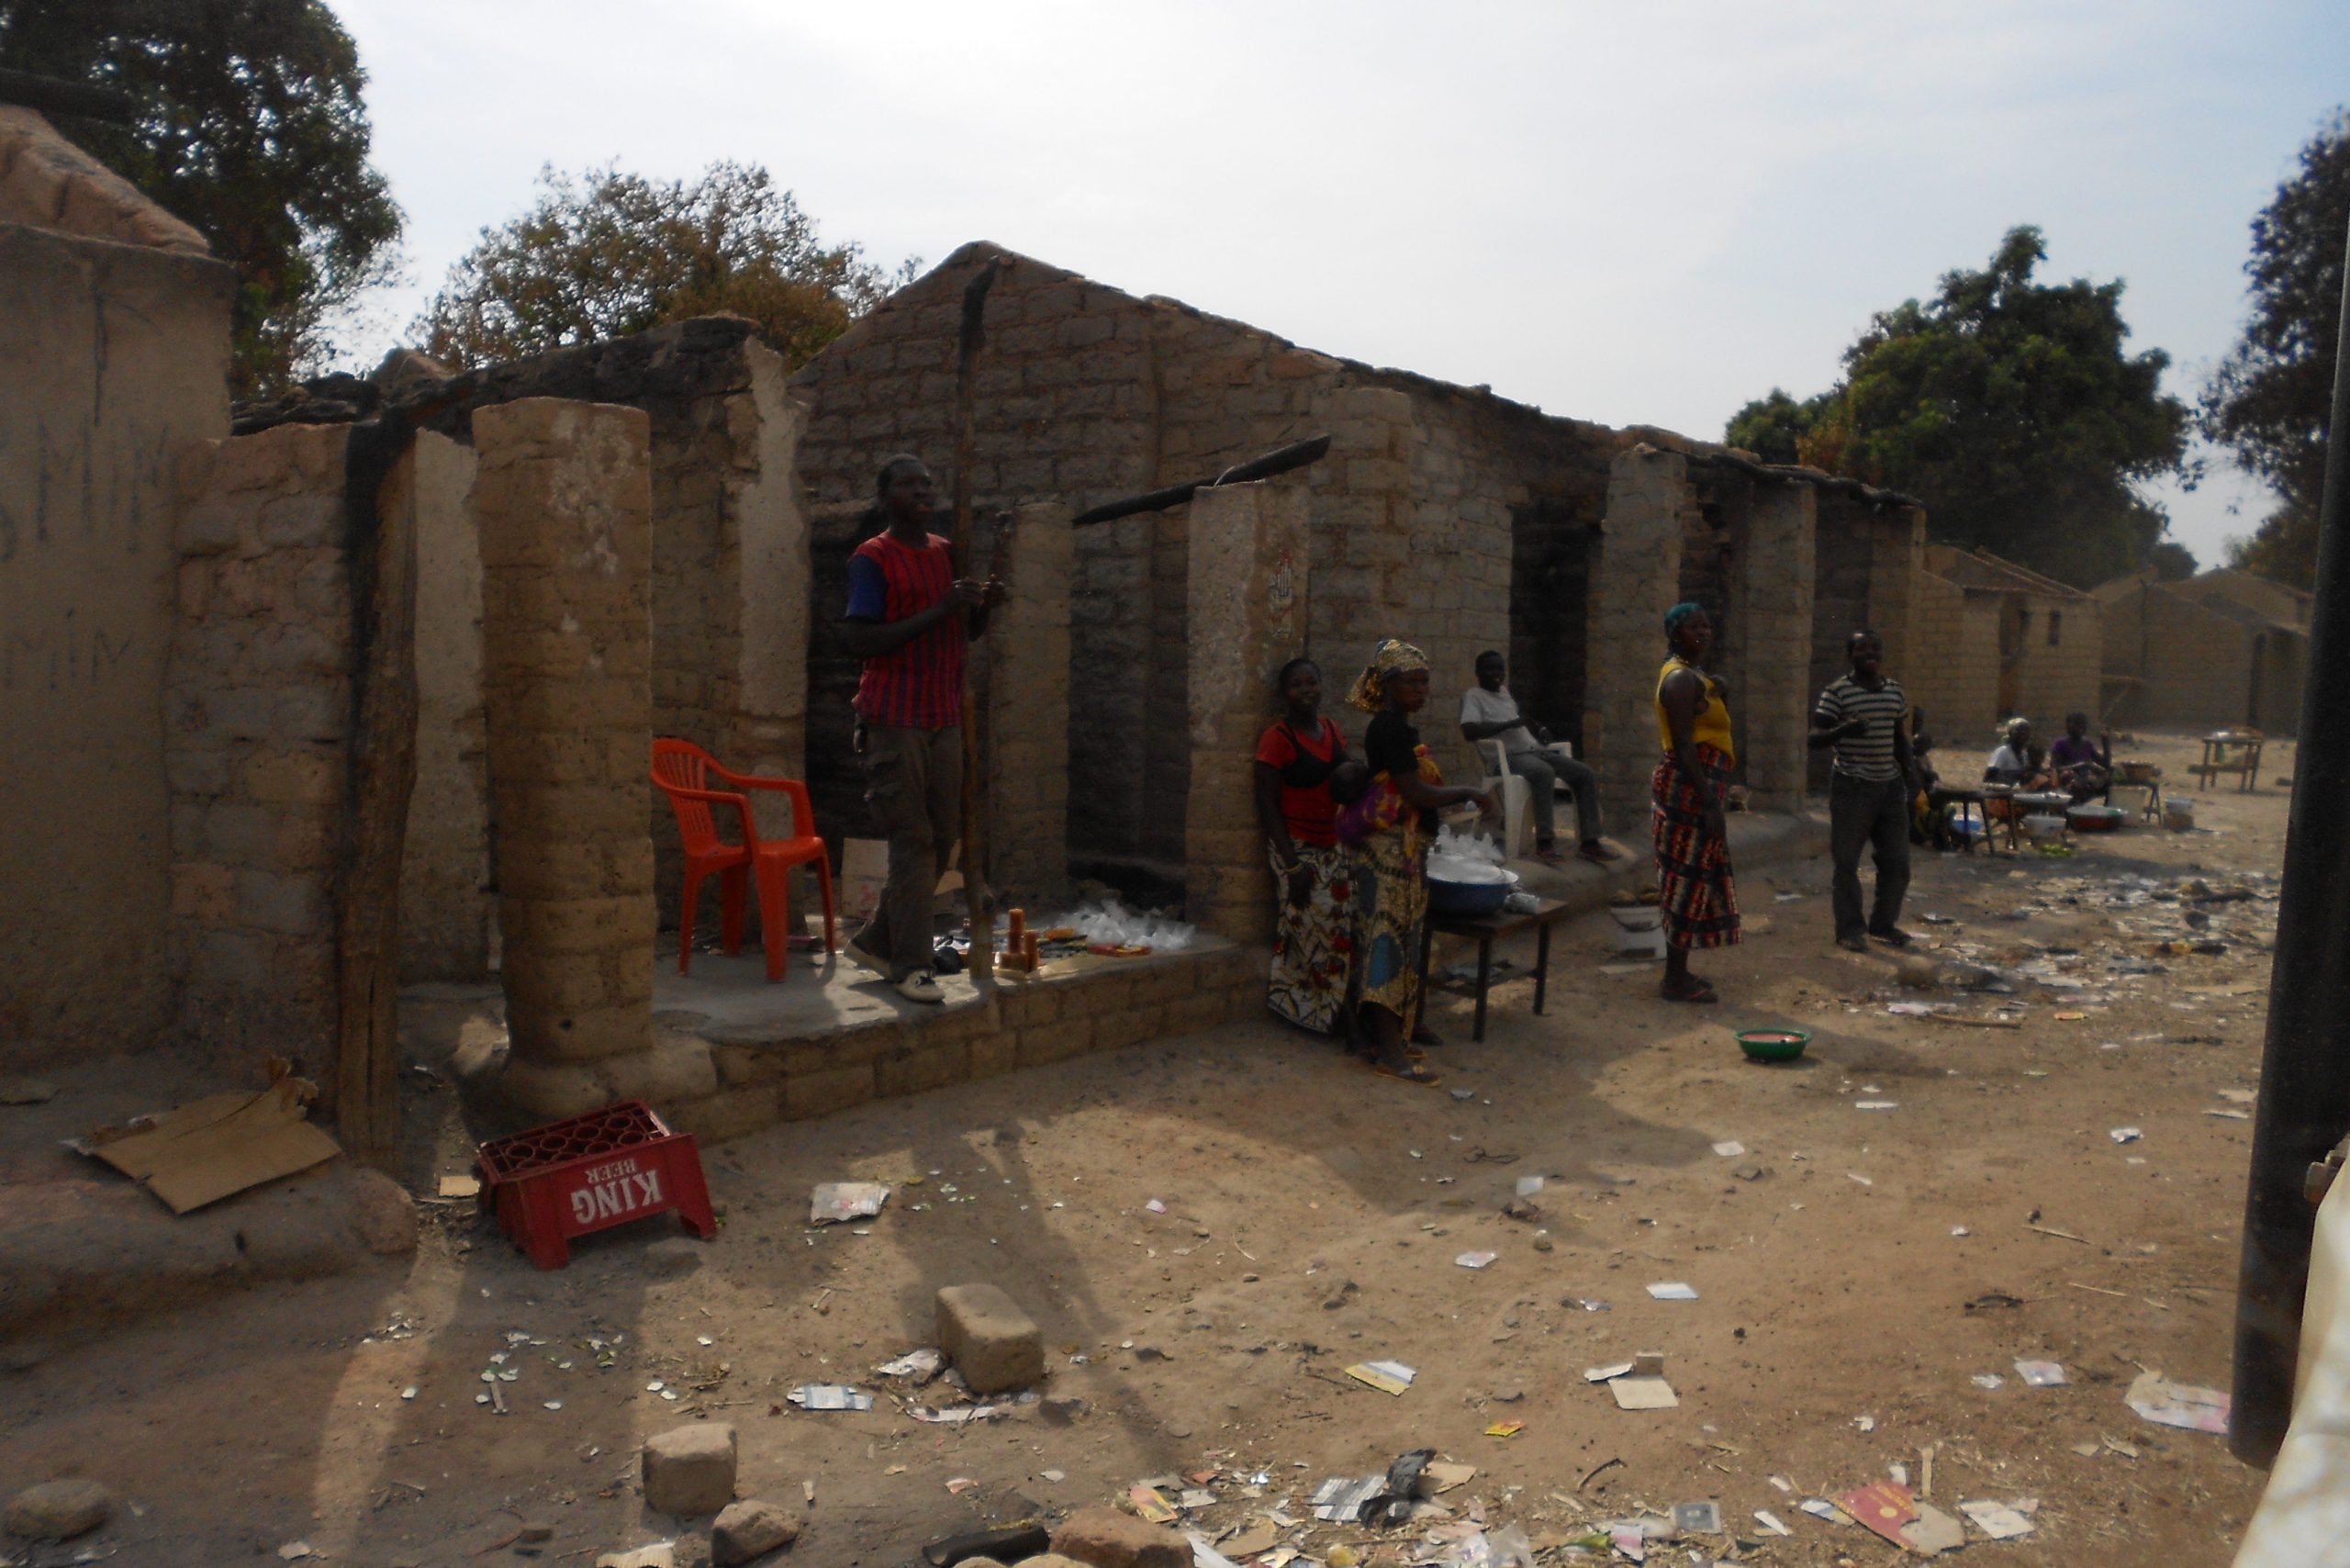 Houses in Ngaundaye destroyed after attacks by Seleka rebels in January 2014.